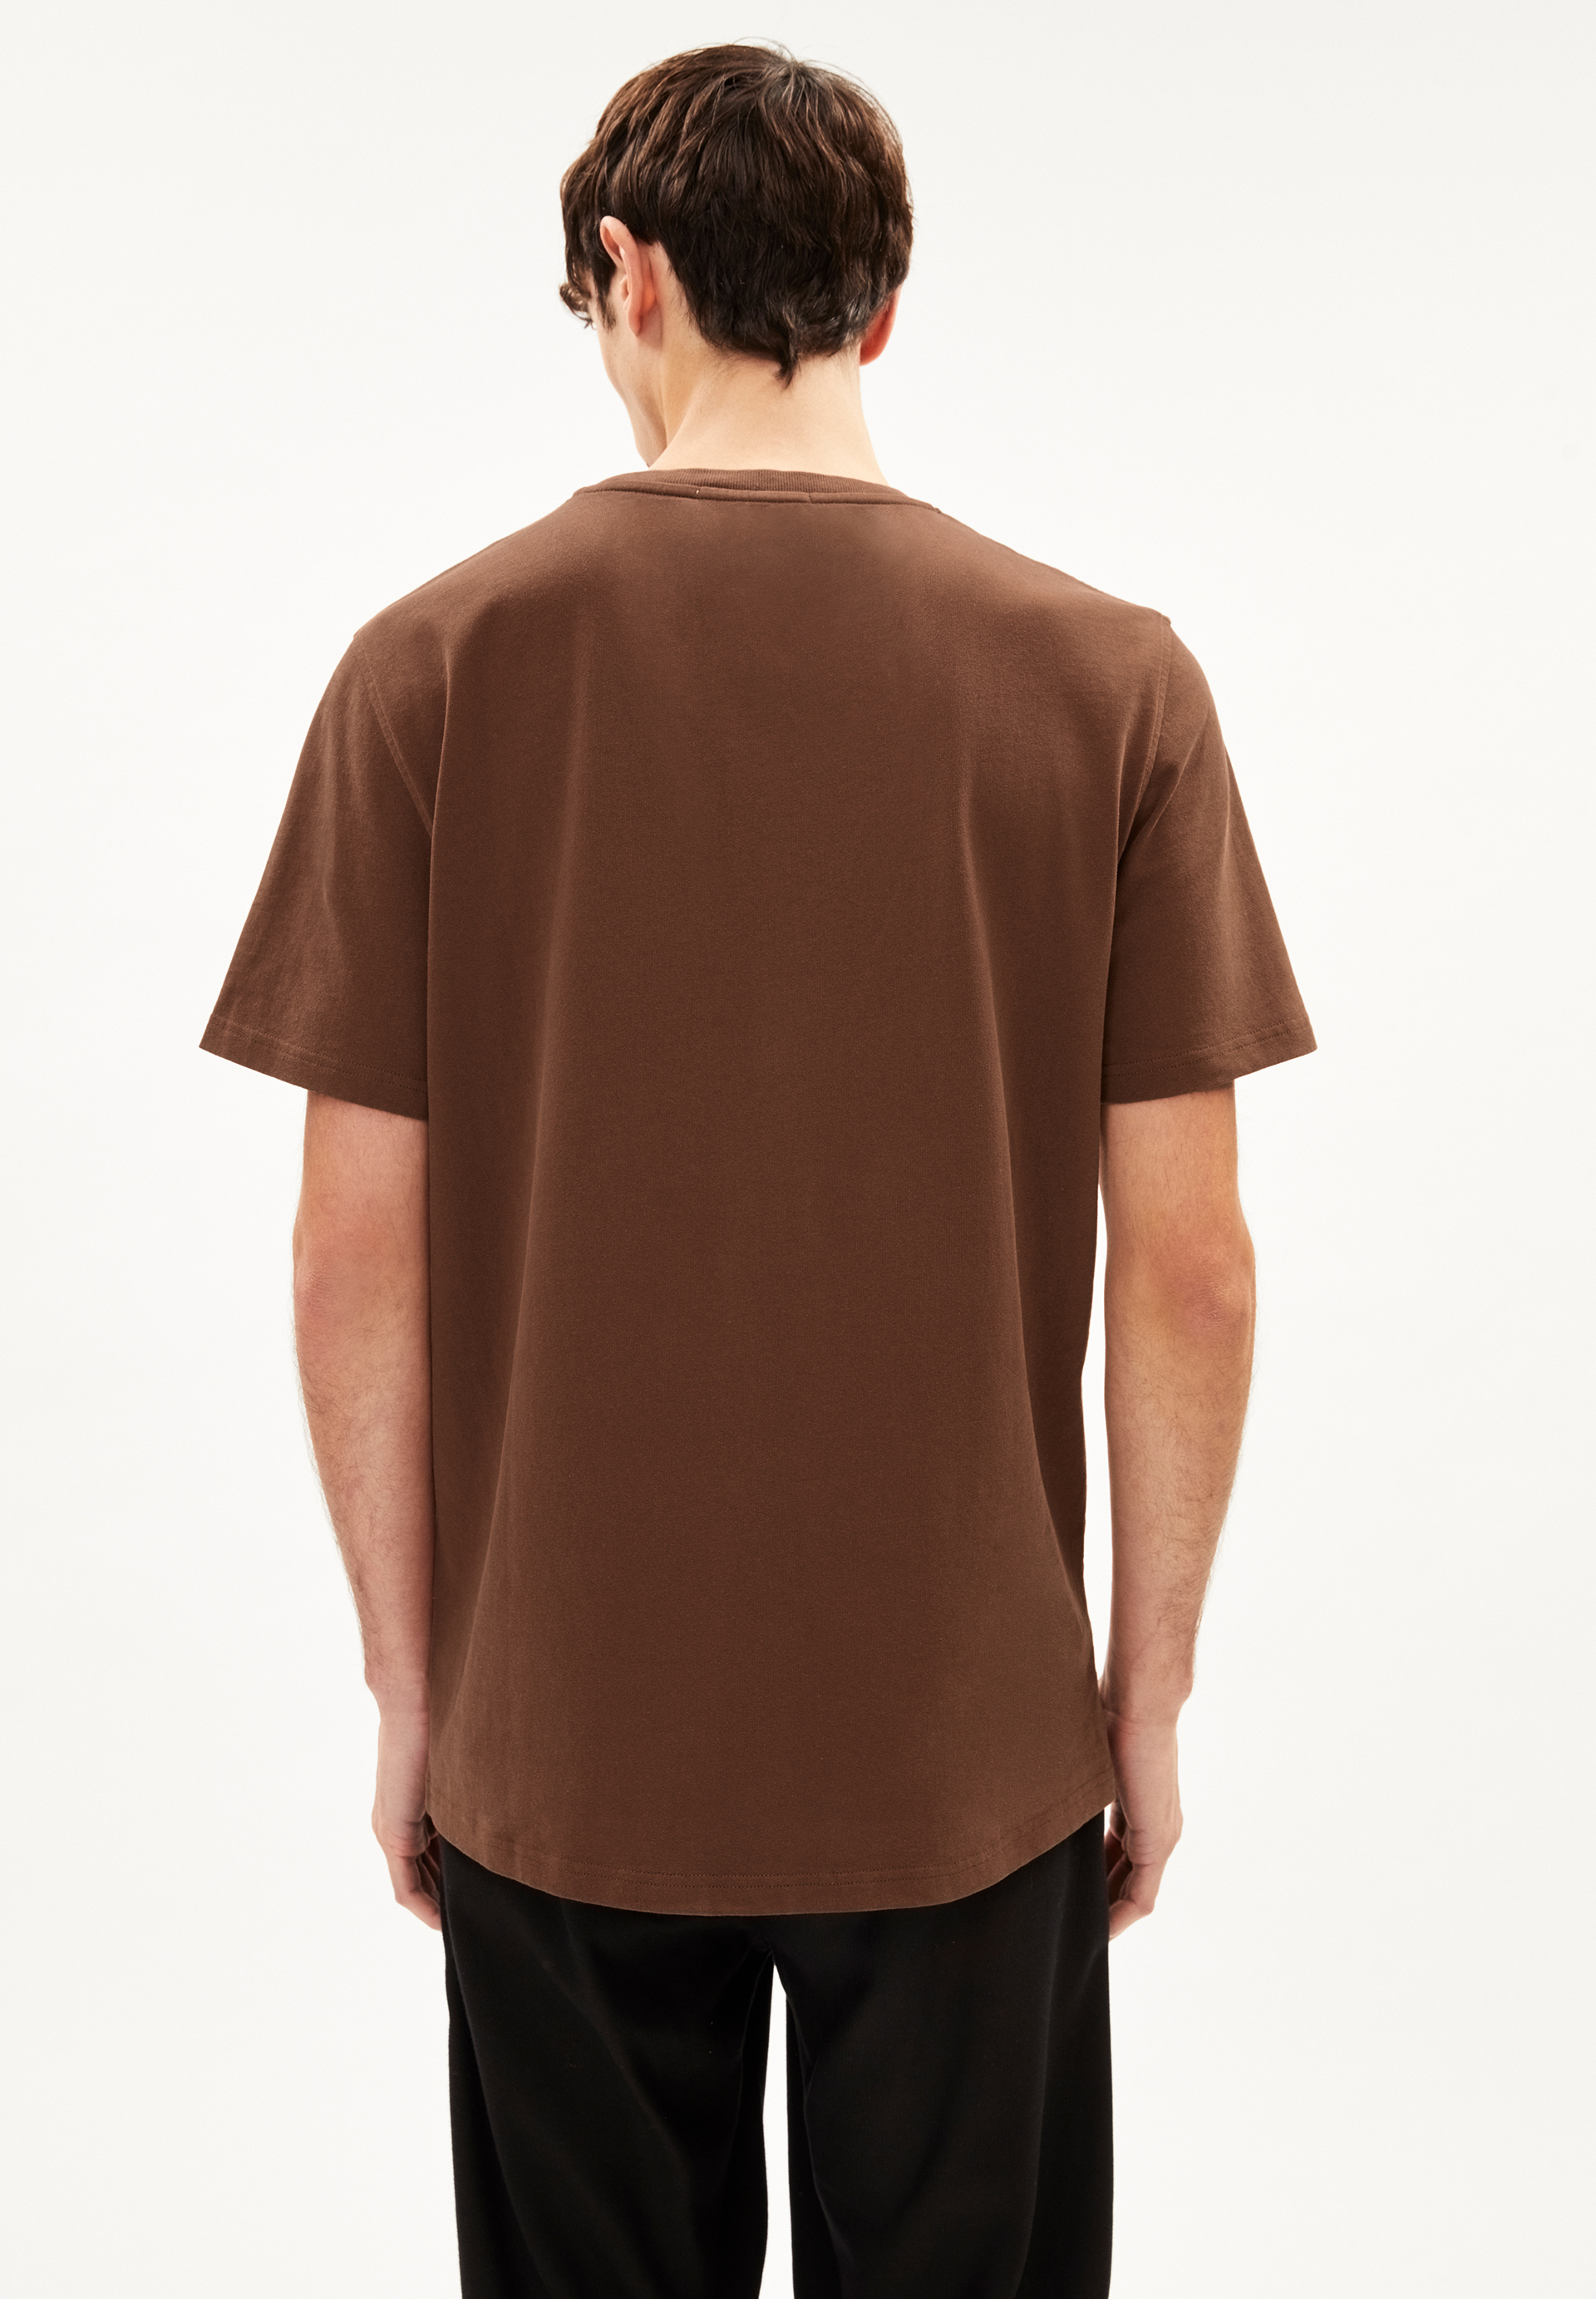 LODAAN PREMIUM BADGES Heavyweight T-Shirt Relaxed Fit made of Organic Cotton Mix